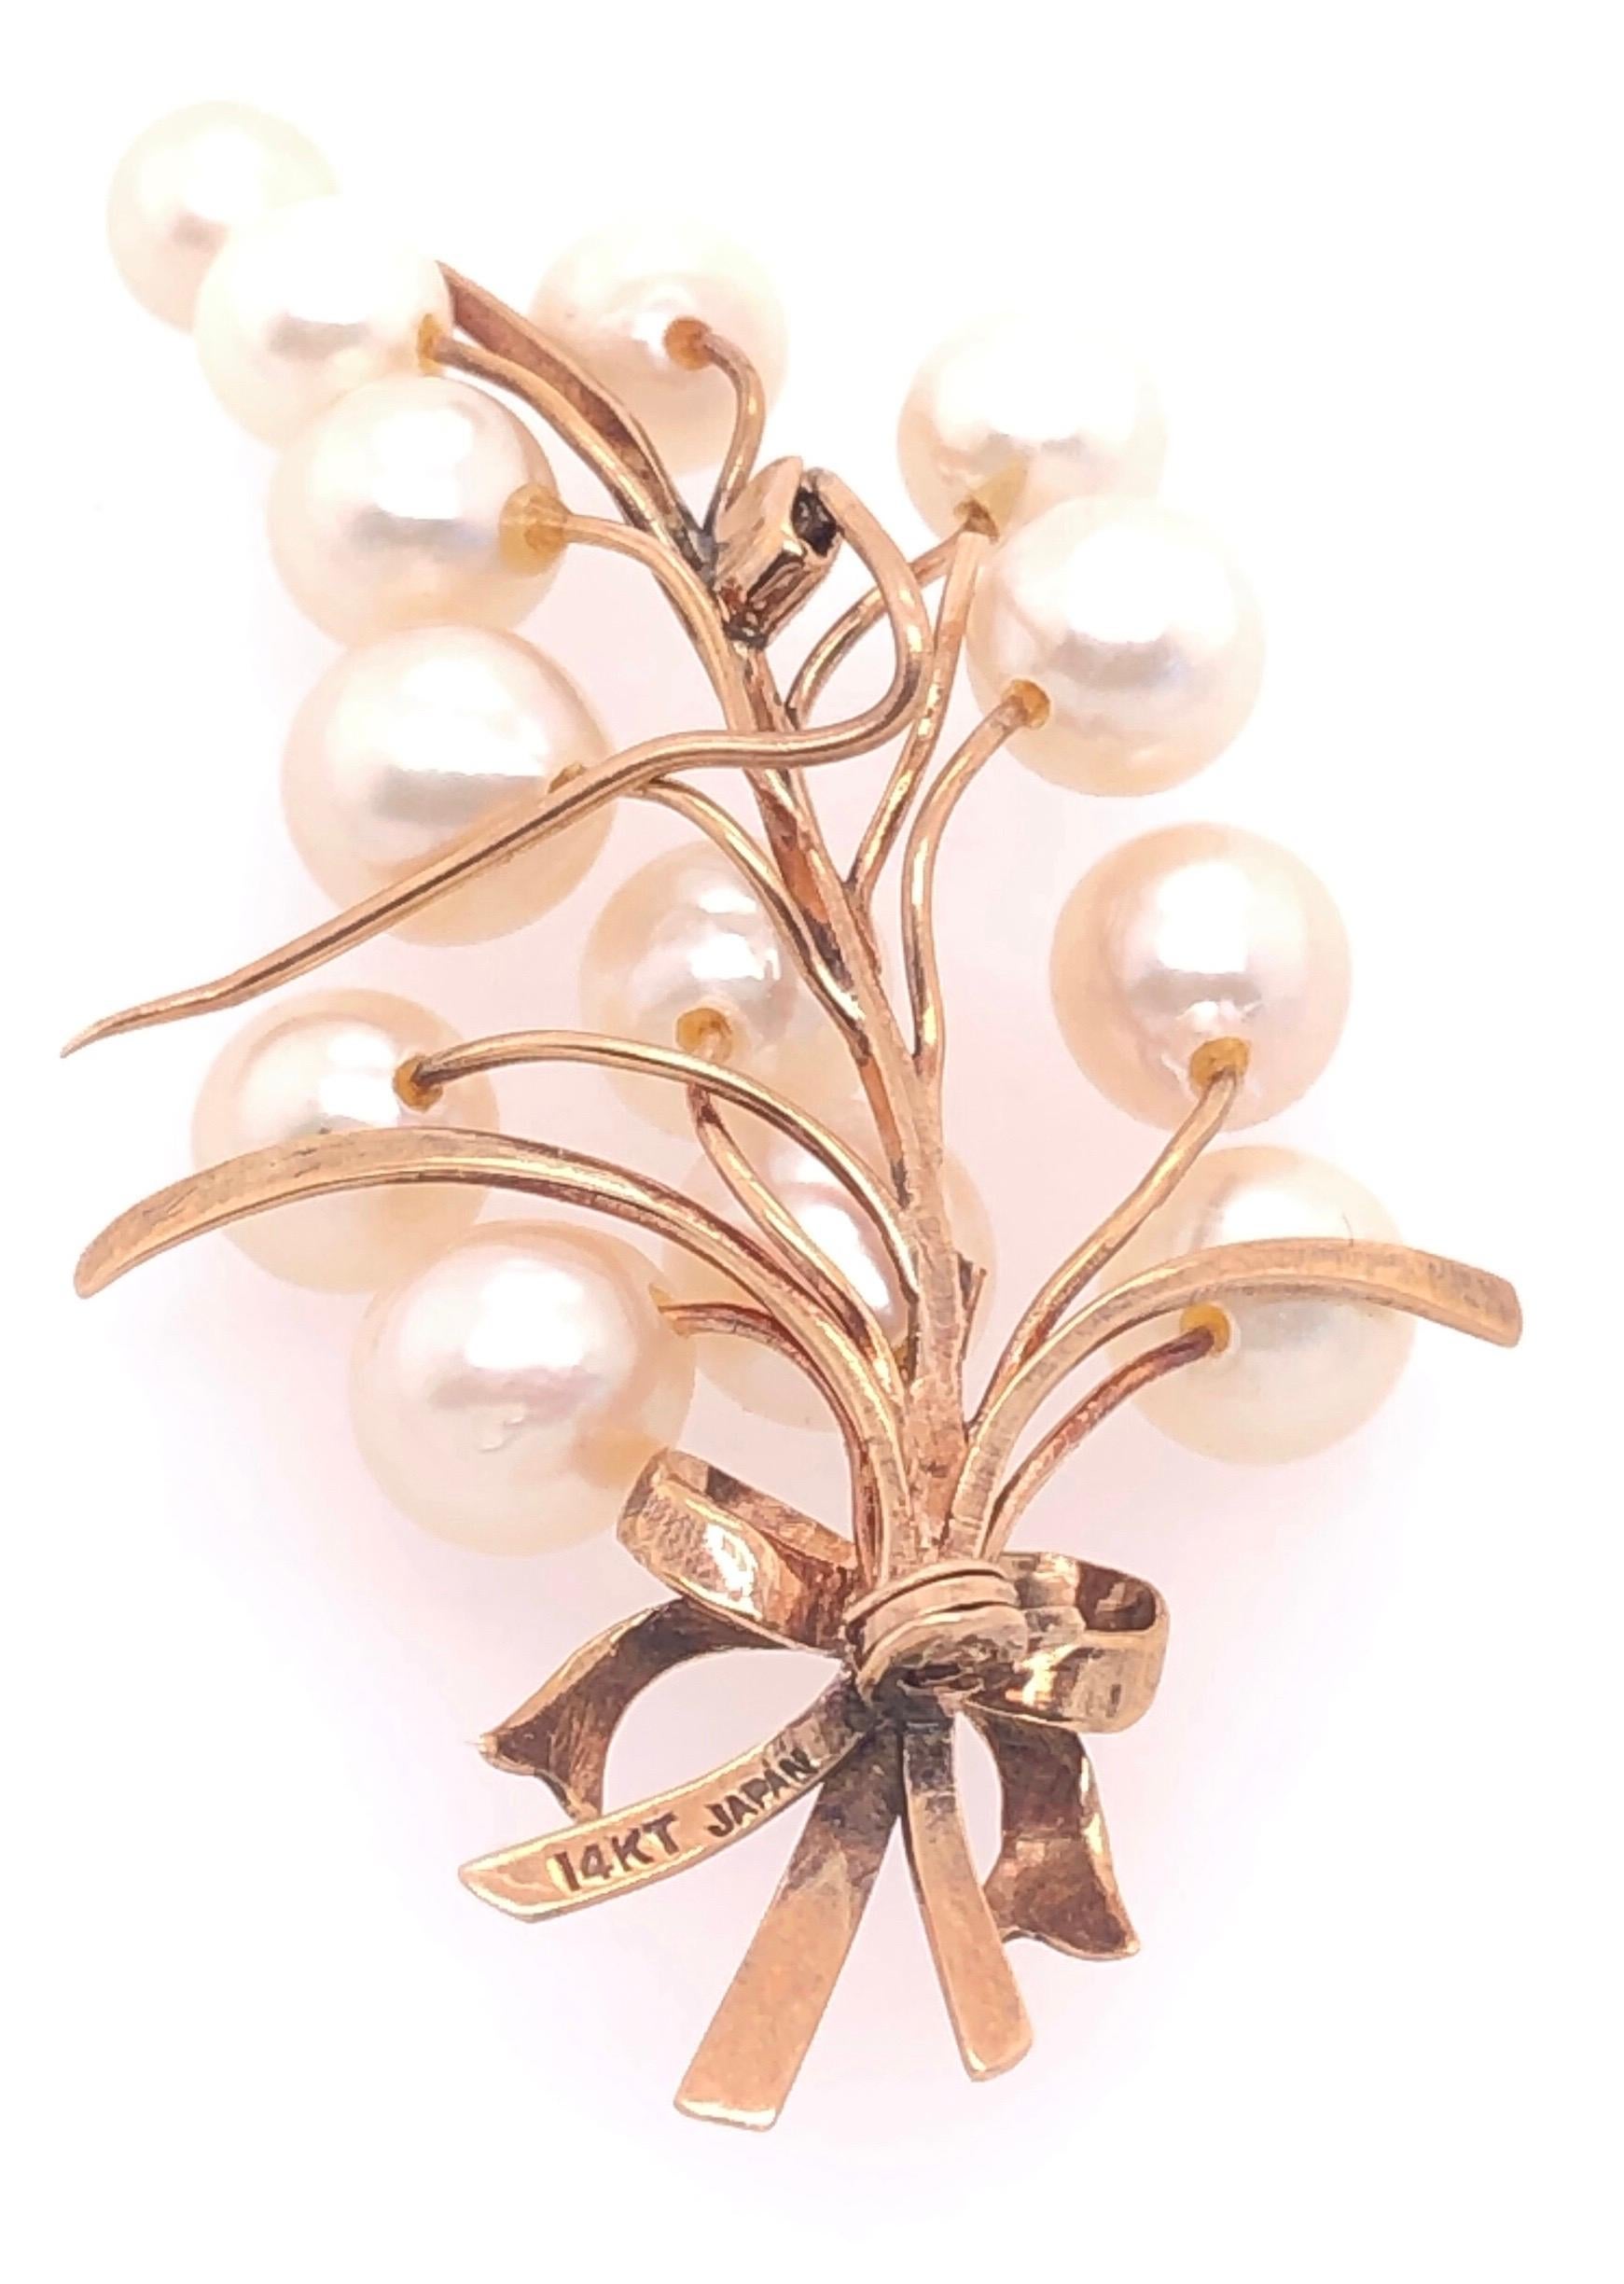 14 Karat Yellow Gold And Pearl Brooch / Pin Japan Stamped
8.20 grams total weight.